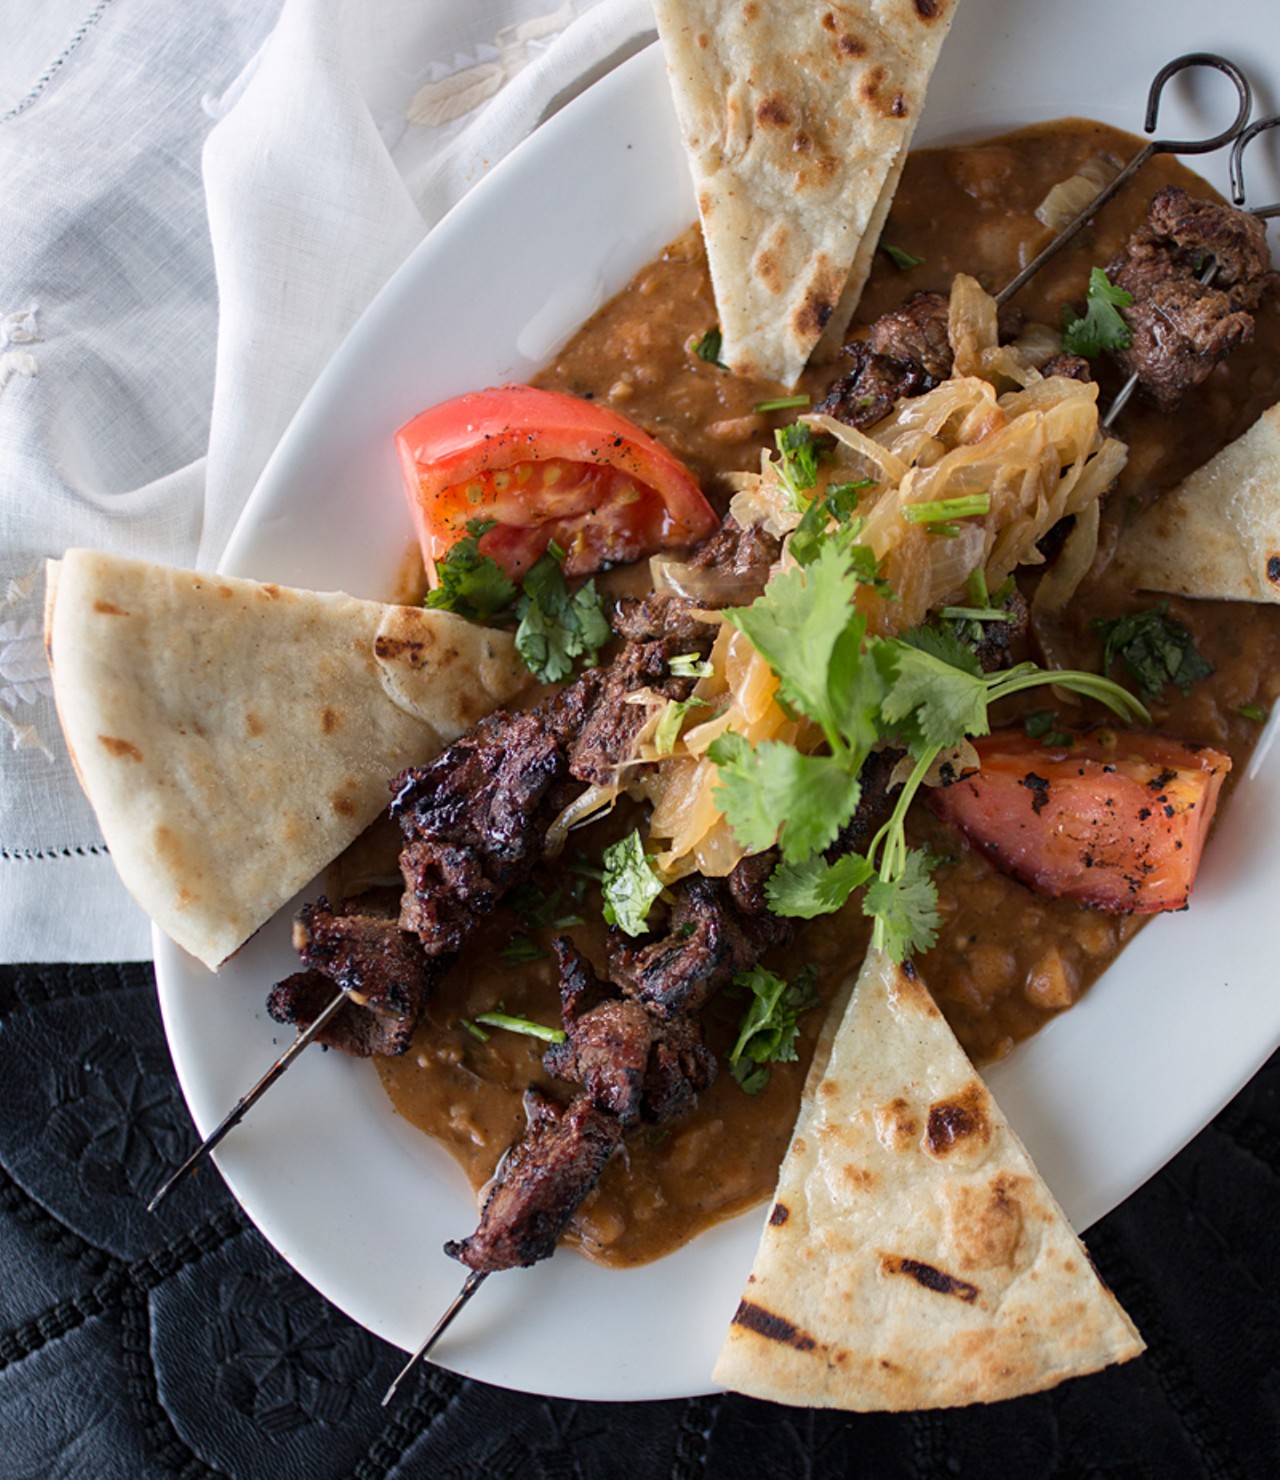 "Beef brochettes" is a grilled beef skewer with harissa, red charmoula sauce and flat bread, served with loubia.